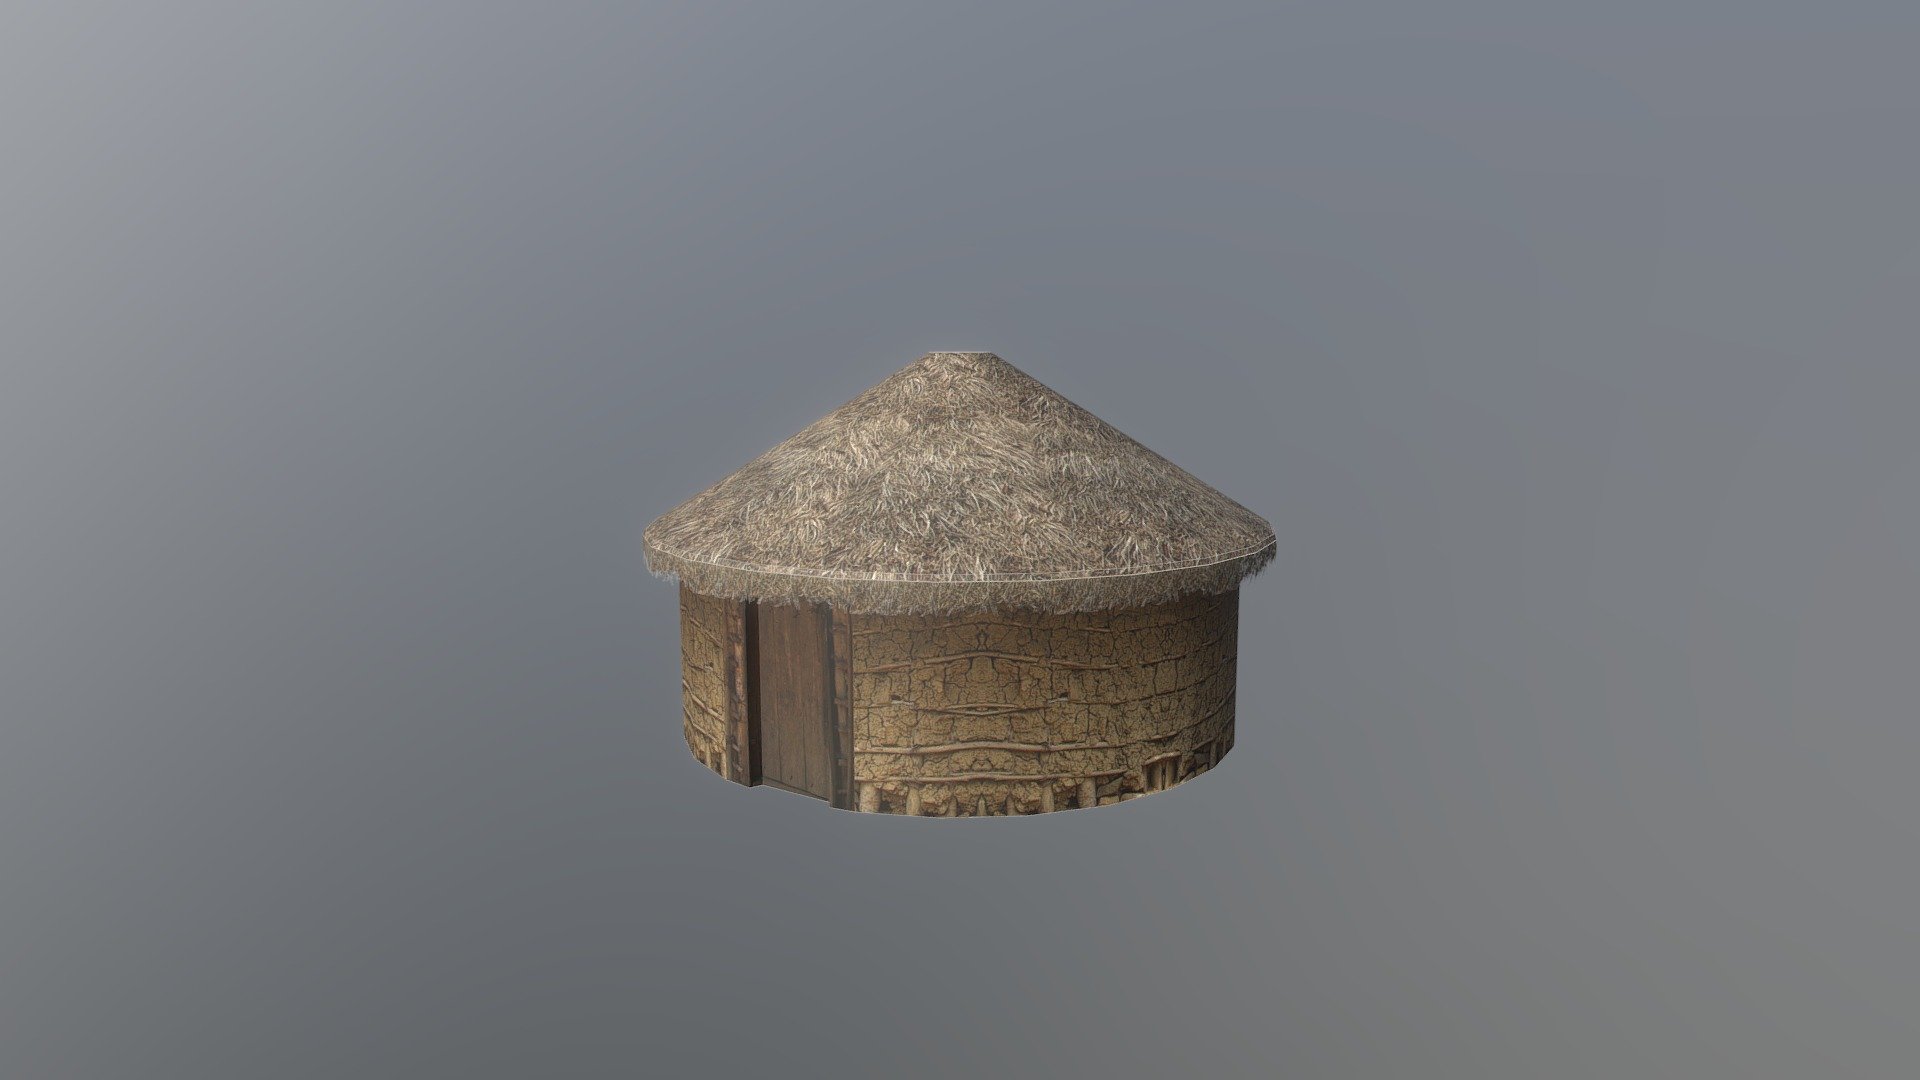 Not my own. Owned by dtryse at https://3dwarehouse.sketchup.com/model/37fdb2ca61c005b5c7c38433436d3efb/Thatched-Mud-Hut?login=true. Please visit and support him if you can!

Uploaded to share with a friend 3d model